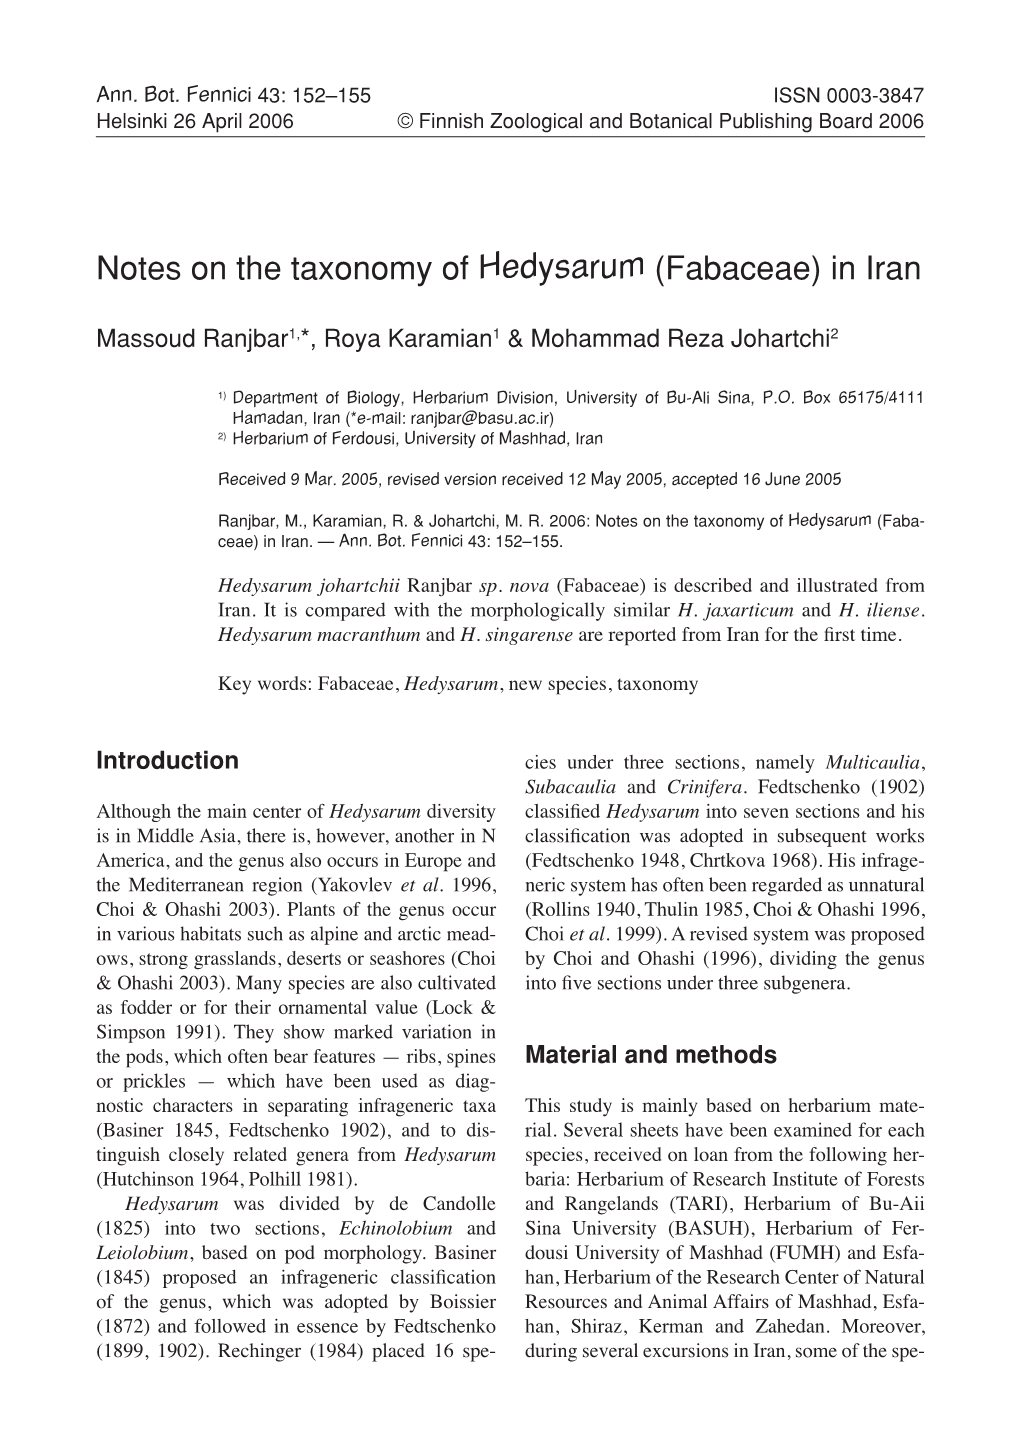 Notes on the Taxonomy of Hedysarum (Fabaceae) in Iran